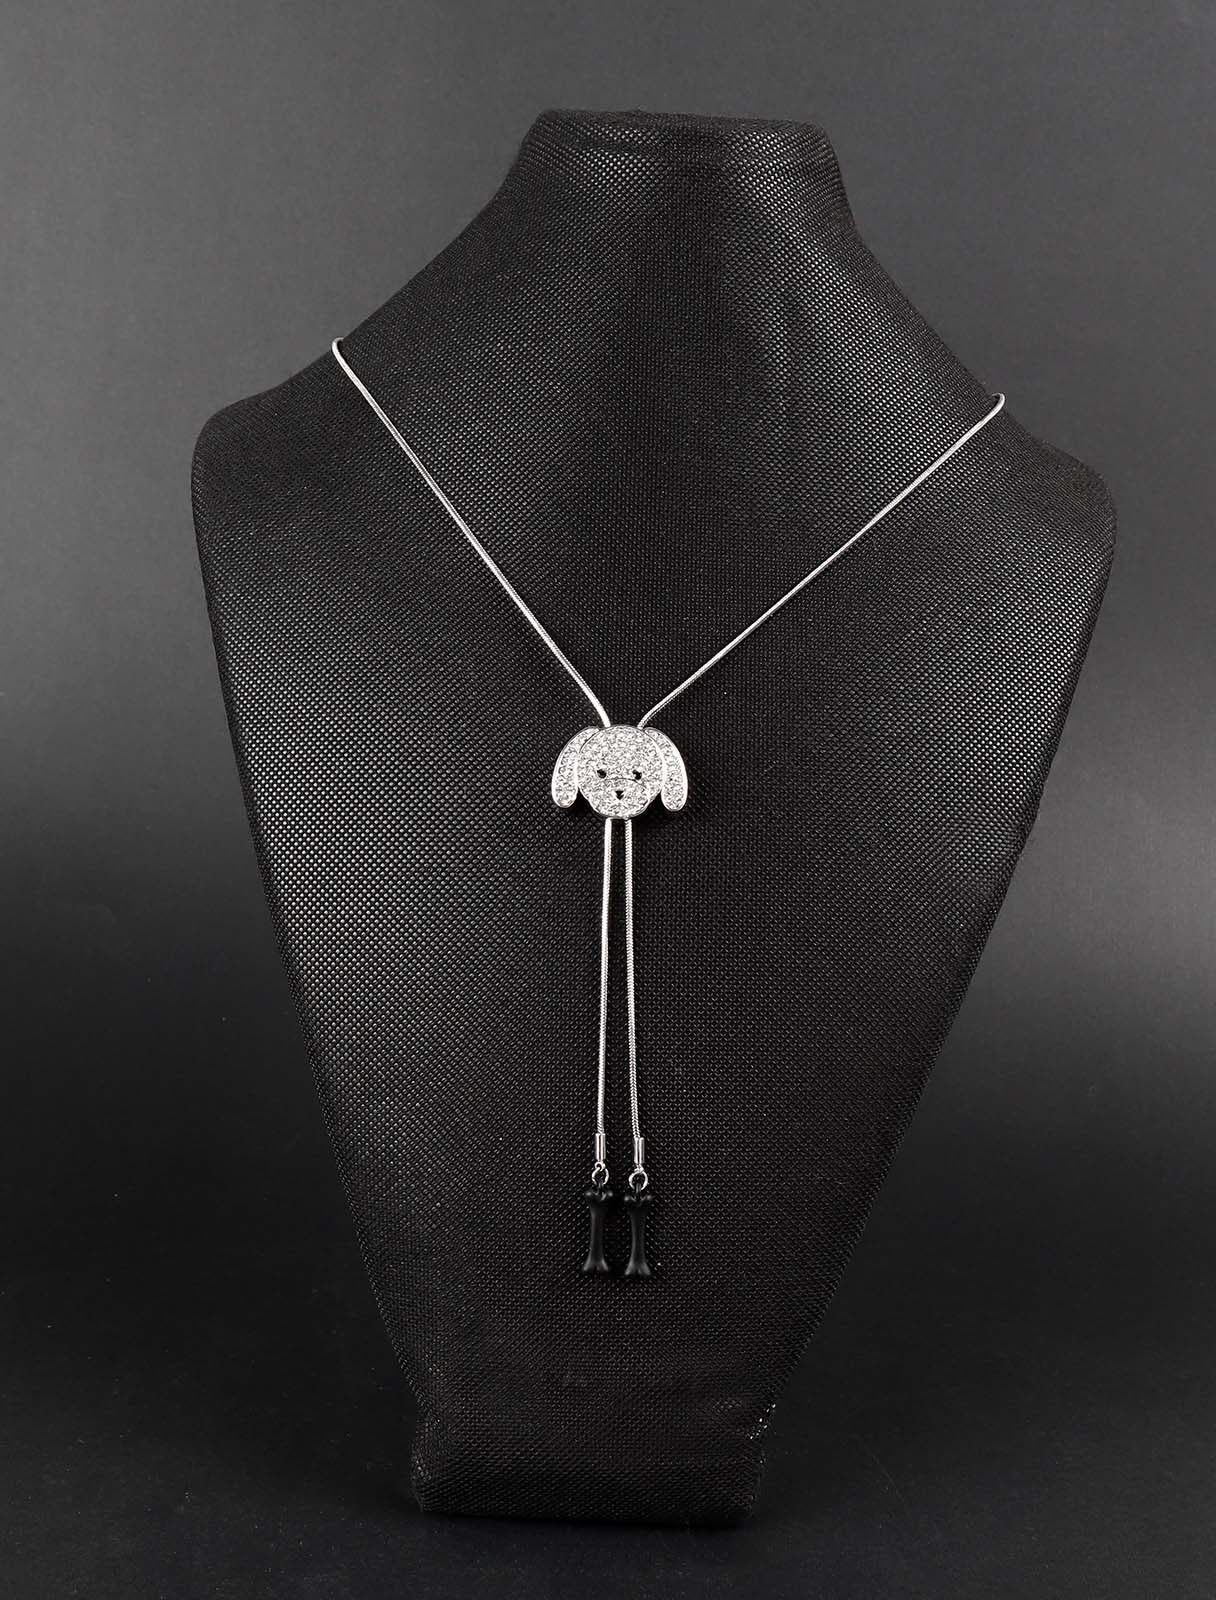 Crystal bobby pin pendant necklace